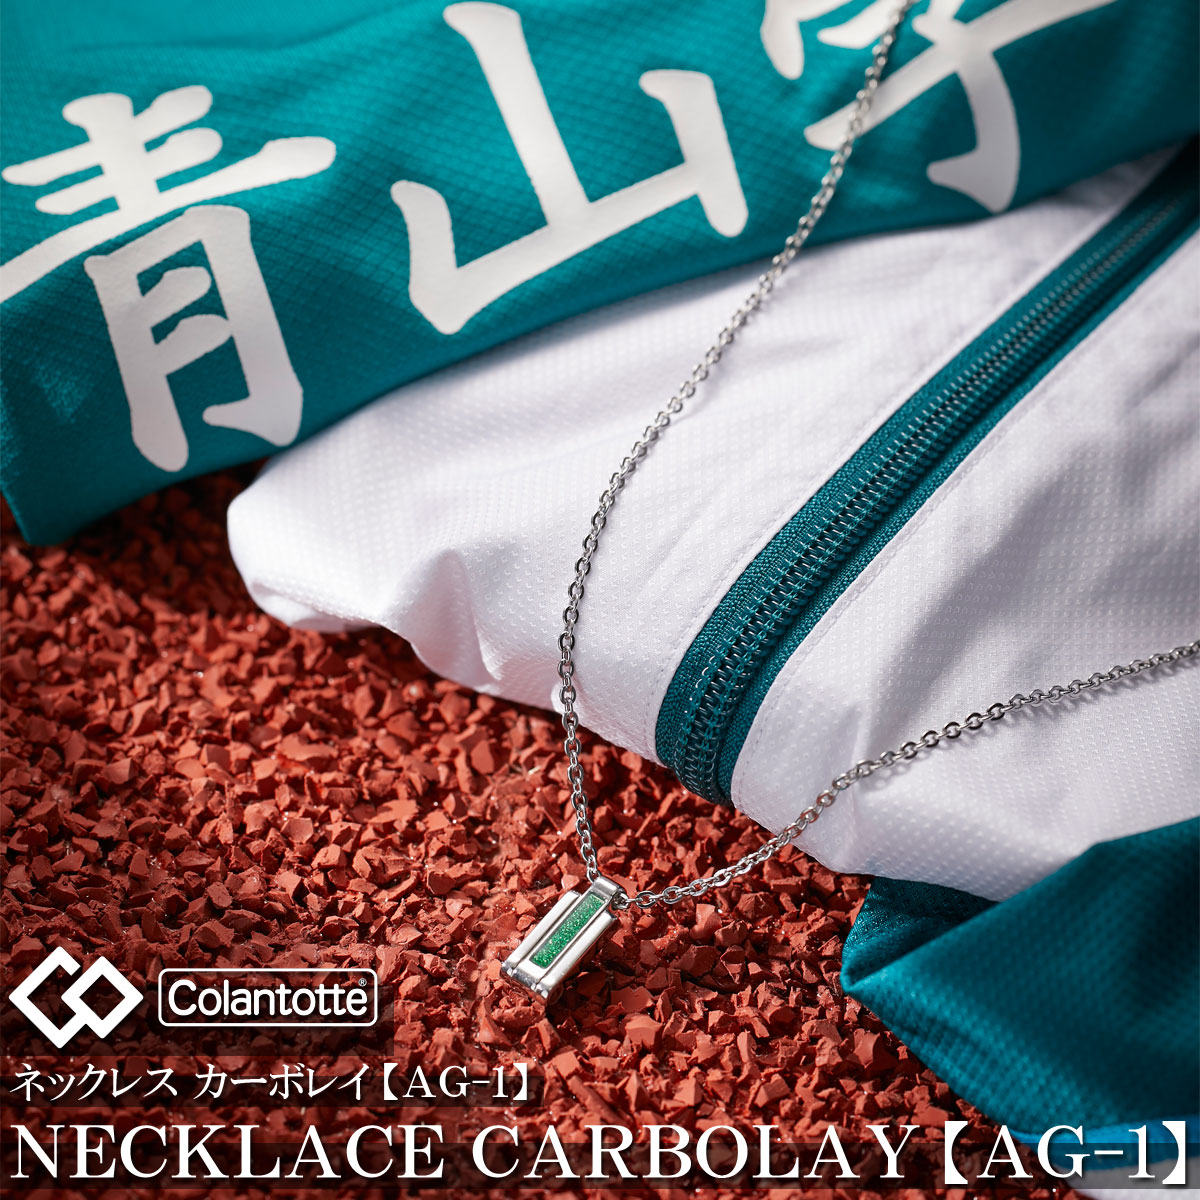 ColanTotte(コラントッテ)日本正規品 Necklace CARBOLAY (ネックレス カーボレイ)  青学モデル 2022モデル 男女兼用 磁気ネックレス 「ACARB30F」 